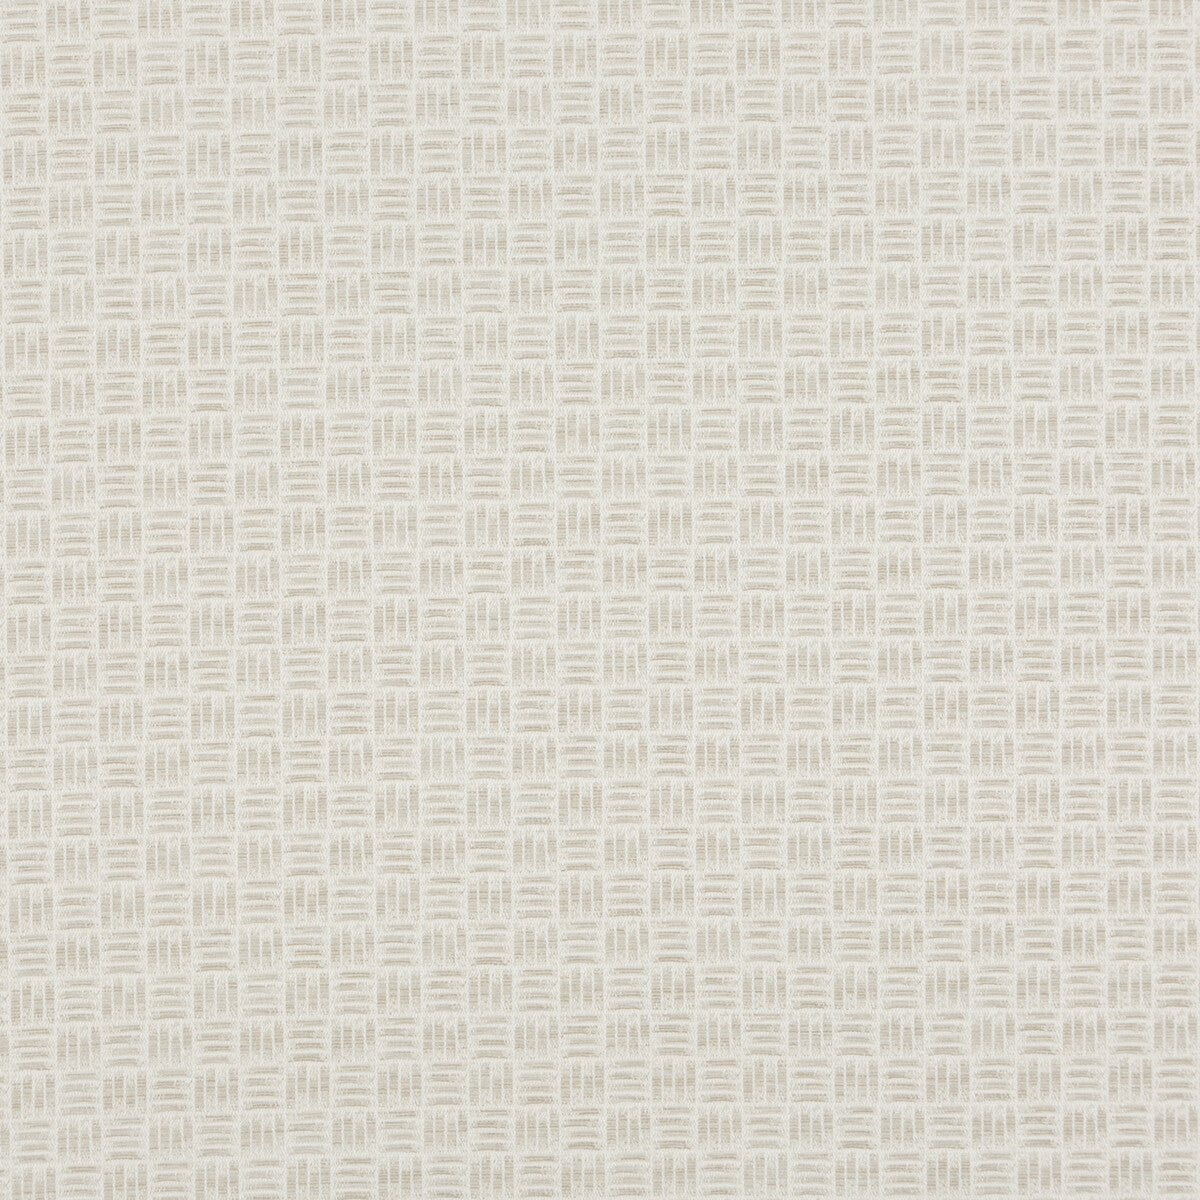 Seismic fabric in pearl color - pattern BF10687.108.0 - by G P &amp; J Baker in the Essential Colours collection